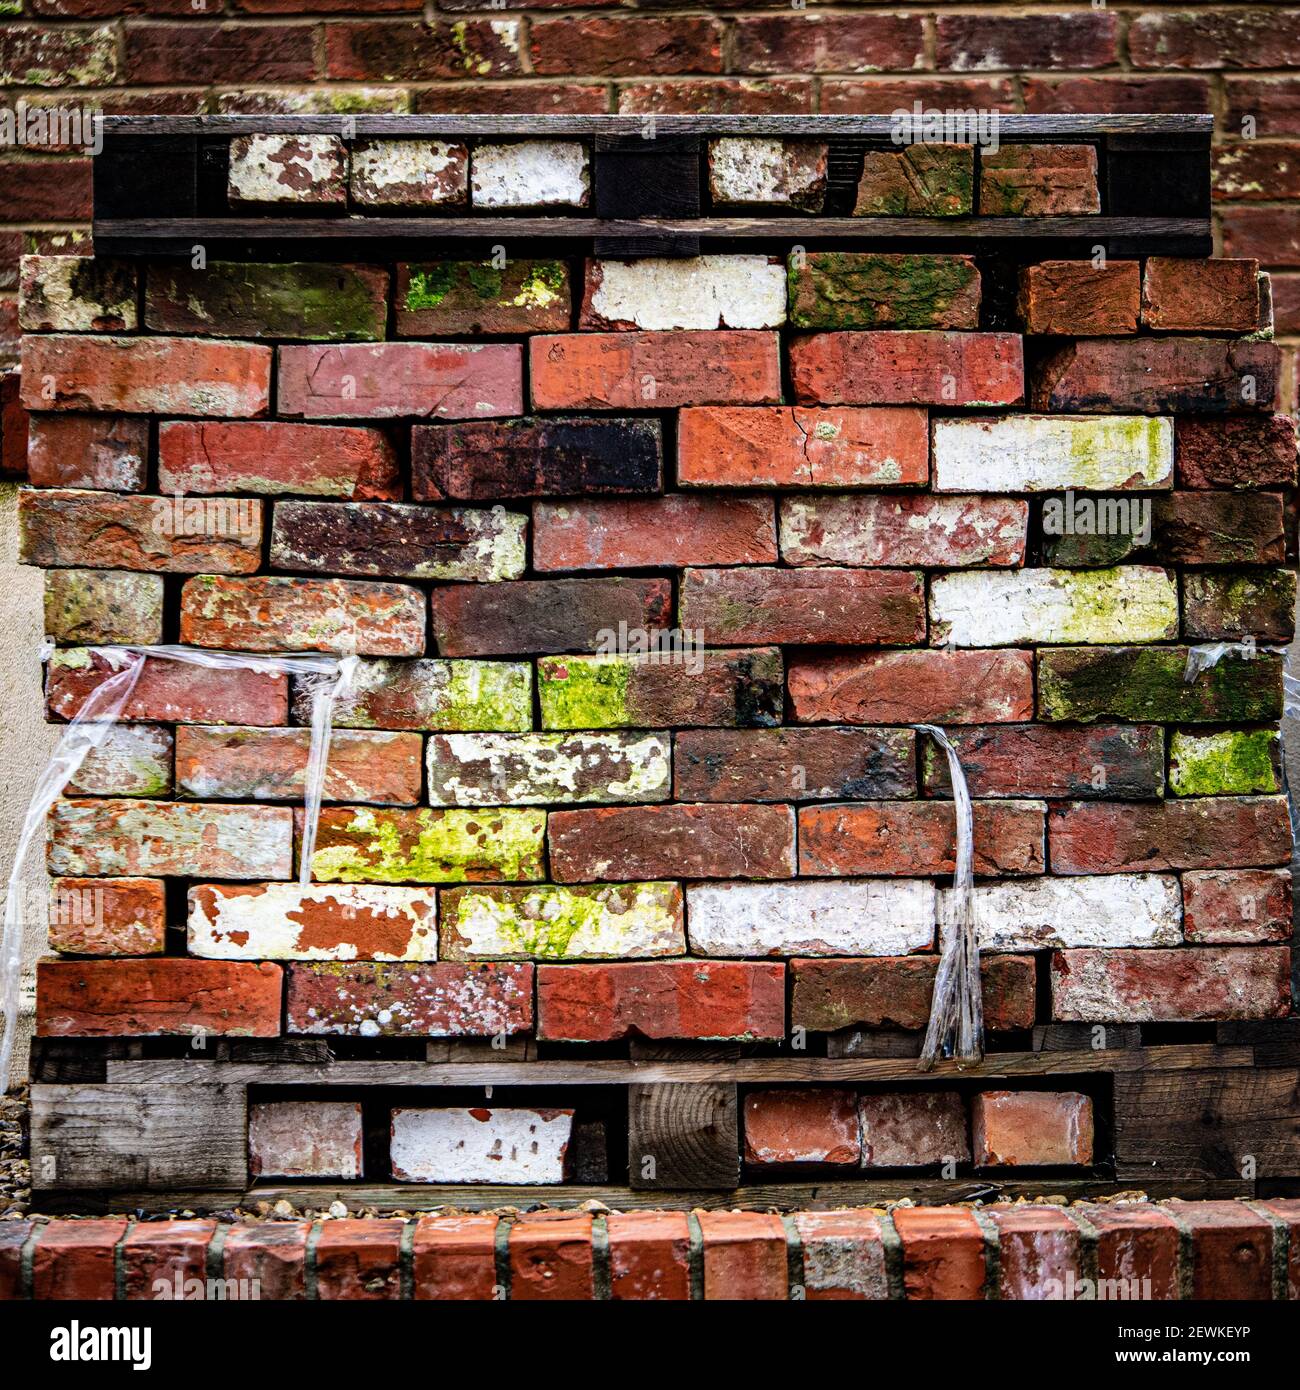 A stack of multi-coloured, aged bricks on pallets in Westbury Leigh, Wiltshire, England, UK. Stock Photo